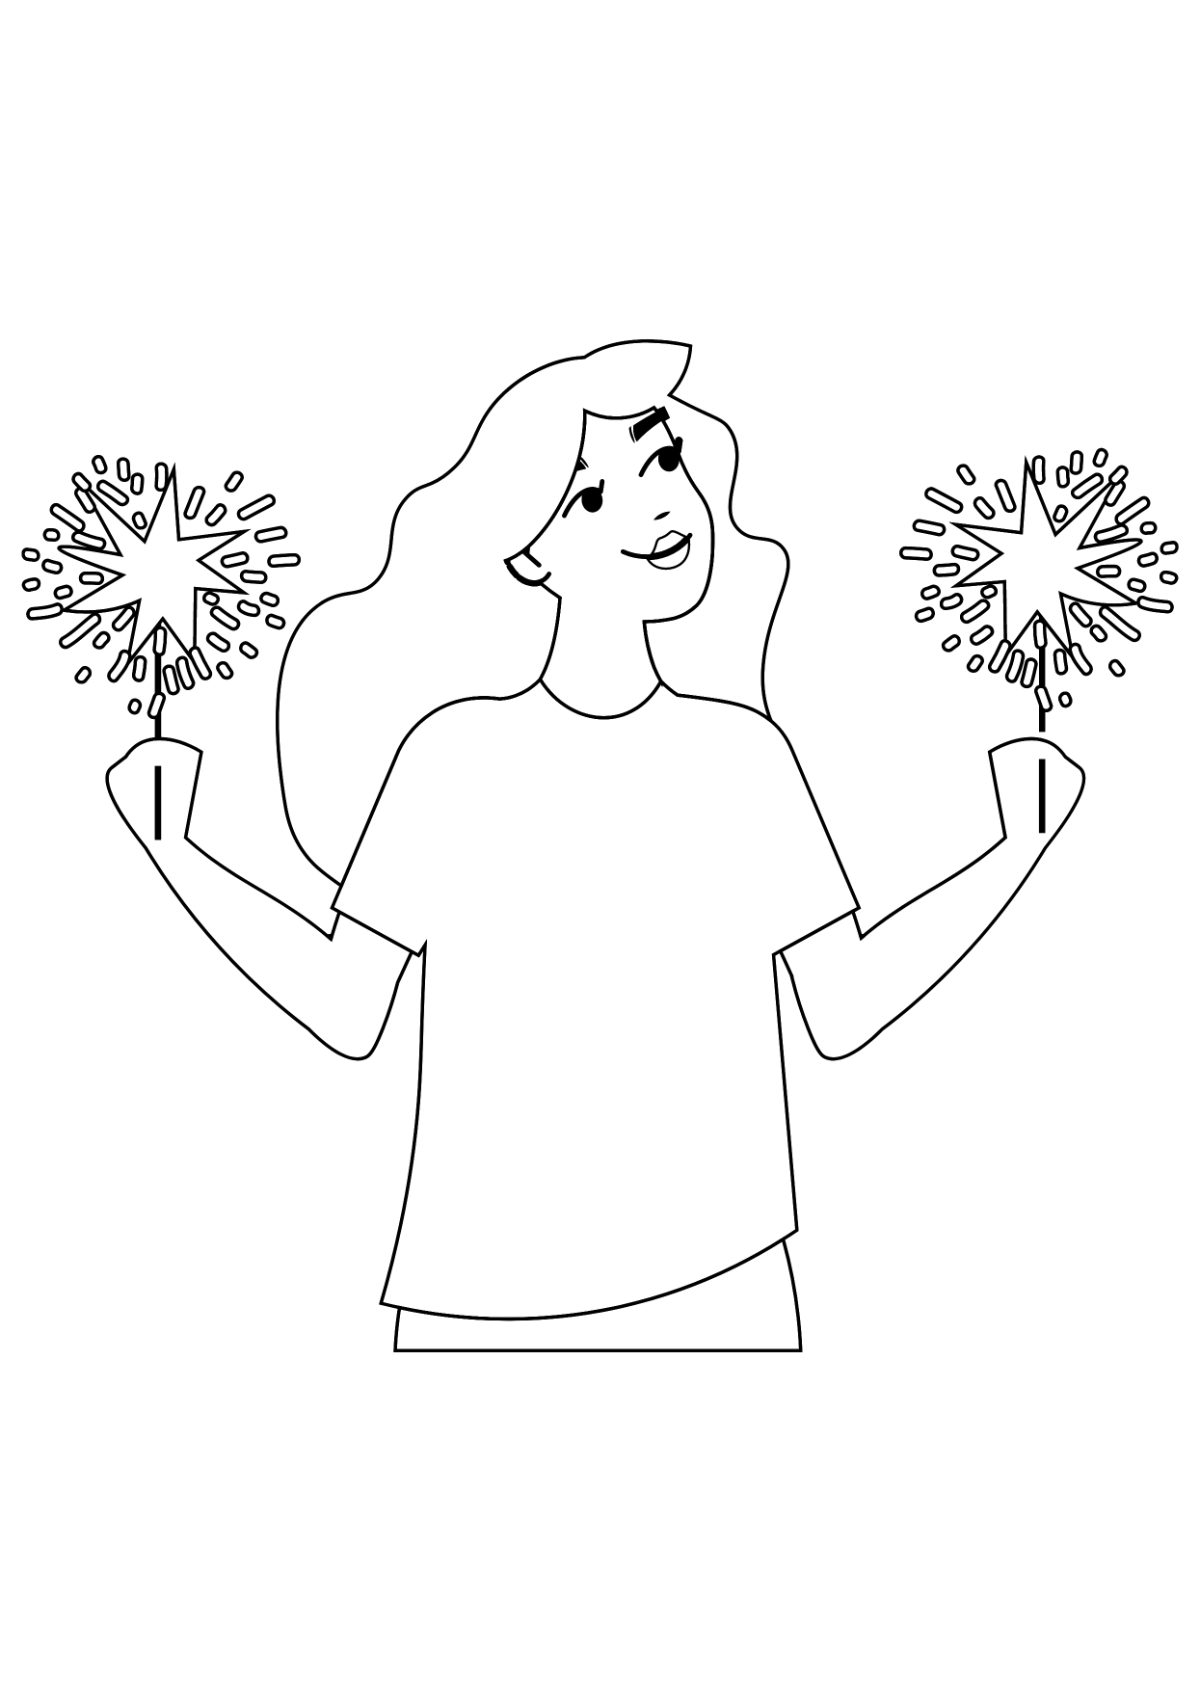 New Year Celebration Drawing Template